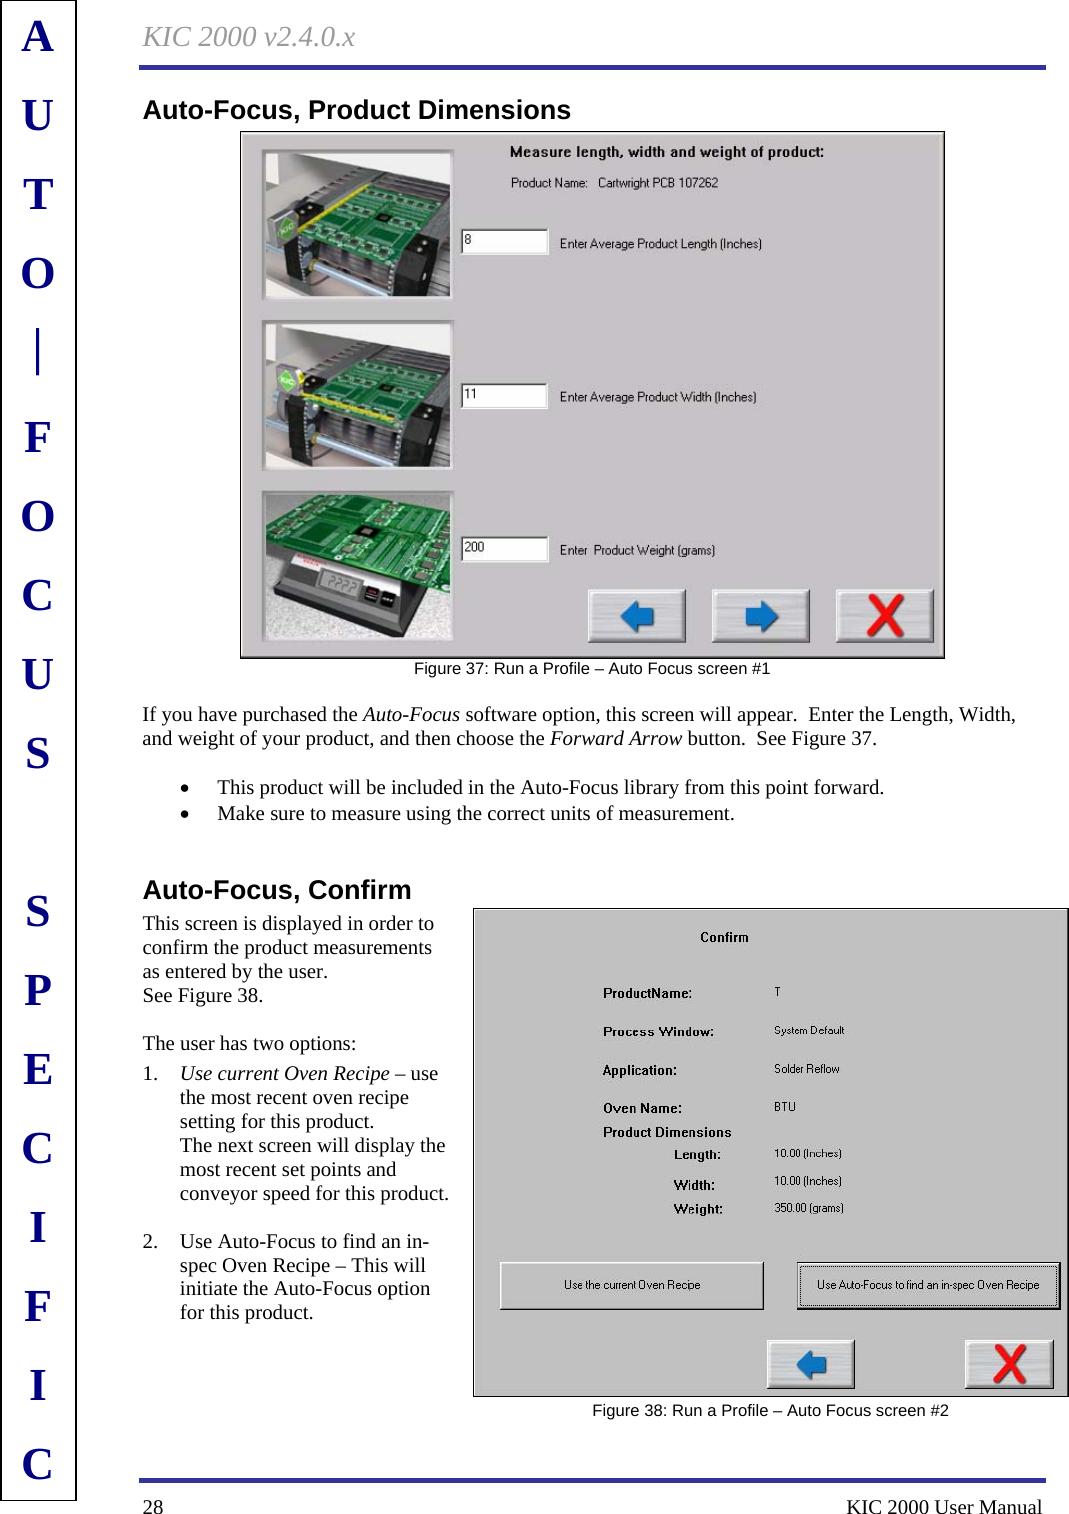 KIC 2000 v2.4.0.x 28    KIC 2000 User Manual Auto-Focus, Product Dimensions  Figure 37: Run a Profile – Auto Focus screen #1  If you have purchased the Auto-Focus software option, this screen will appear.  Enter the Length, Width, and weight of your product, and then choose the Forward Arrow button.  See Figure 37.    • This product will be included in the Auto-Focus library from this point forward. • Make sure to measure using the correct units of measurement.  Auto-Focus, Confirm This screen is displayed in order to confirm the product measurements as entered by the user.   See Figure 38.    The user has two options: 1. Use current Oven Recipe – use the most recent oven recipe setting for this product. The next screen will display the most recent set points and conveyor speed for this product.  2. Use Auto-Focus to find an in-spec Oven Recipe – This will initiate the Auto-Focus option for this product.      Figure 38: Run a Profile – Auto Focus screen #2 AUTO⎪FOCUS  SPECIFIC 